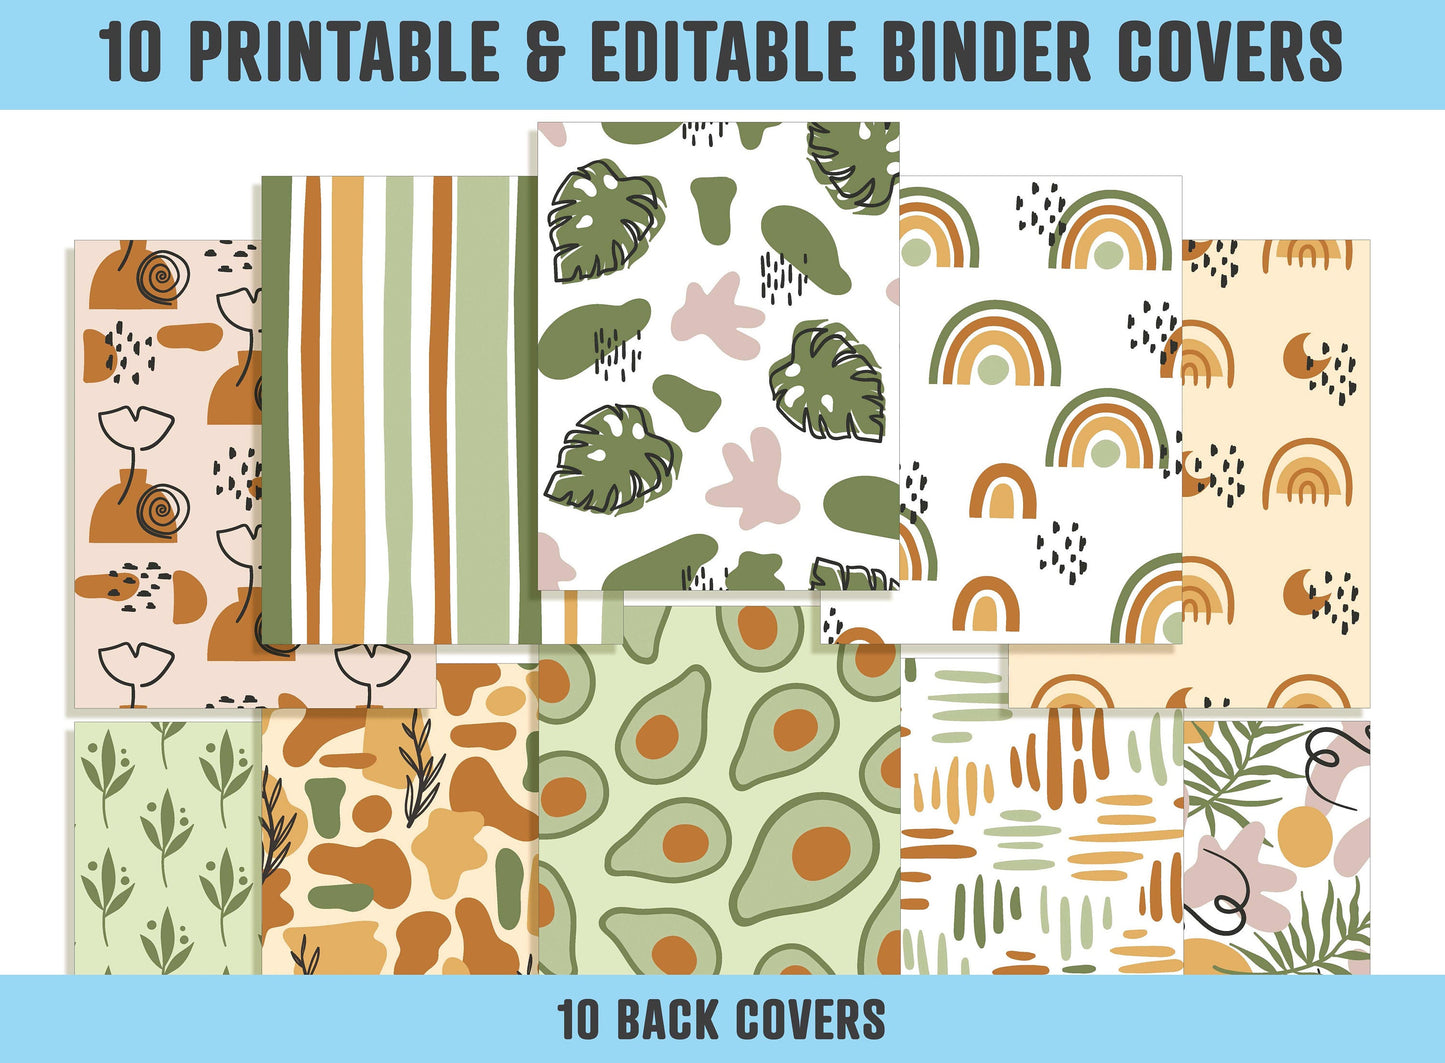 Mixed Abstract Shapes Binder Cover, 10 Printable & Editable Binder Covers+Spines, Teacher/School Binder Labels, Planner/Folder Inserts